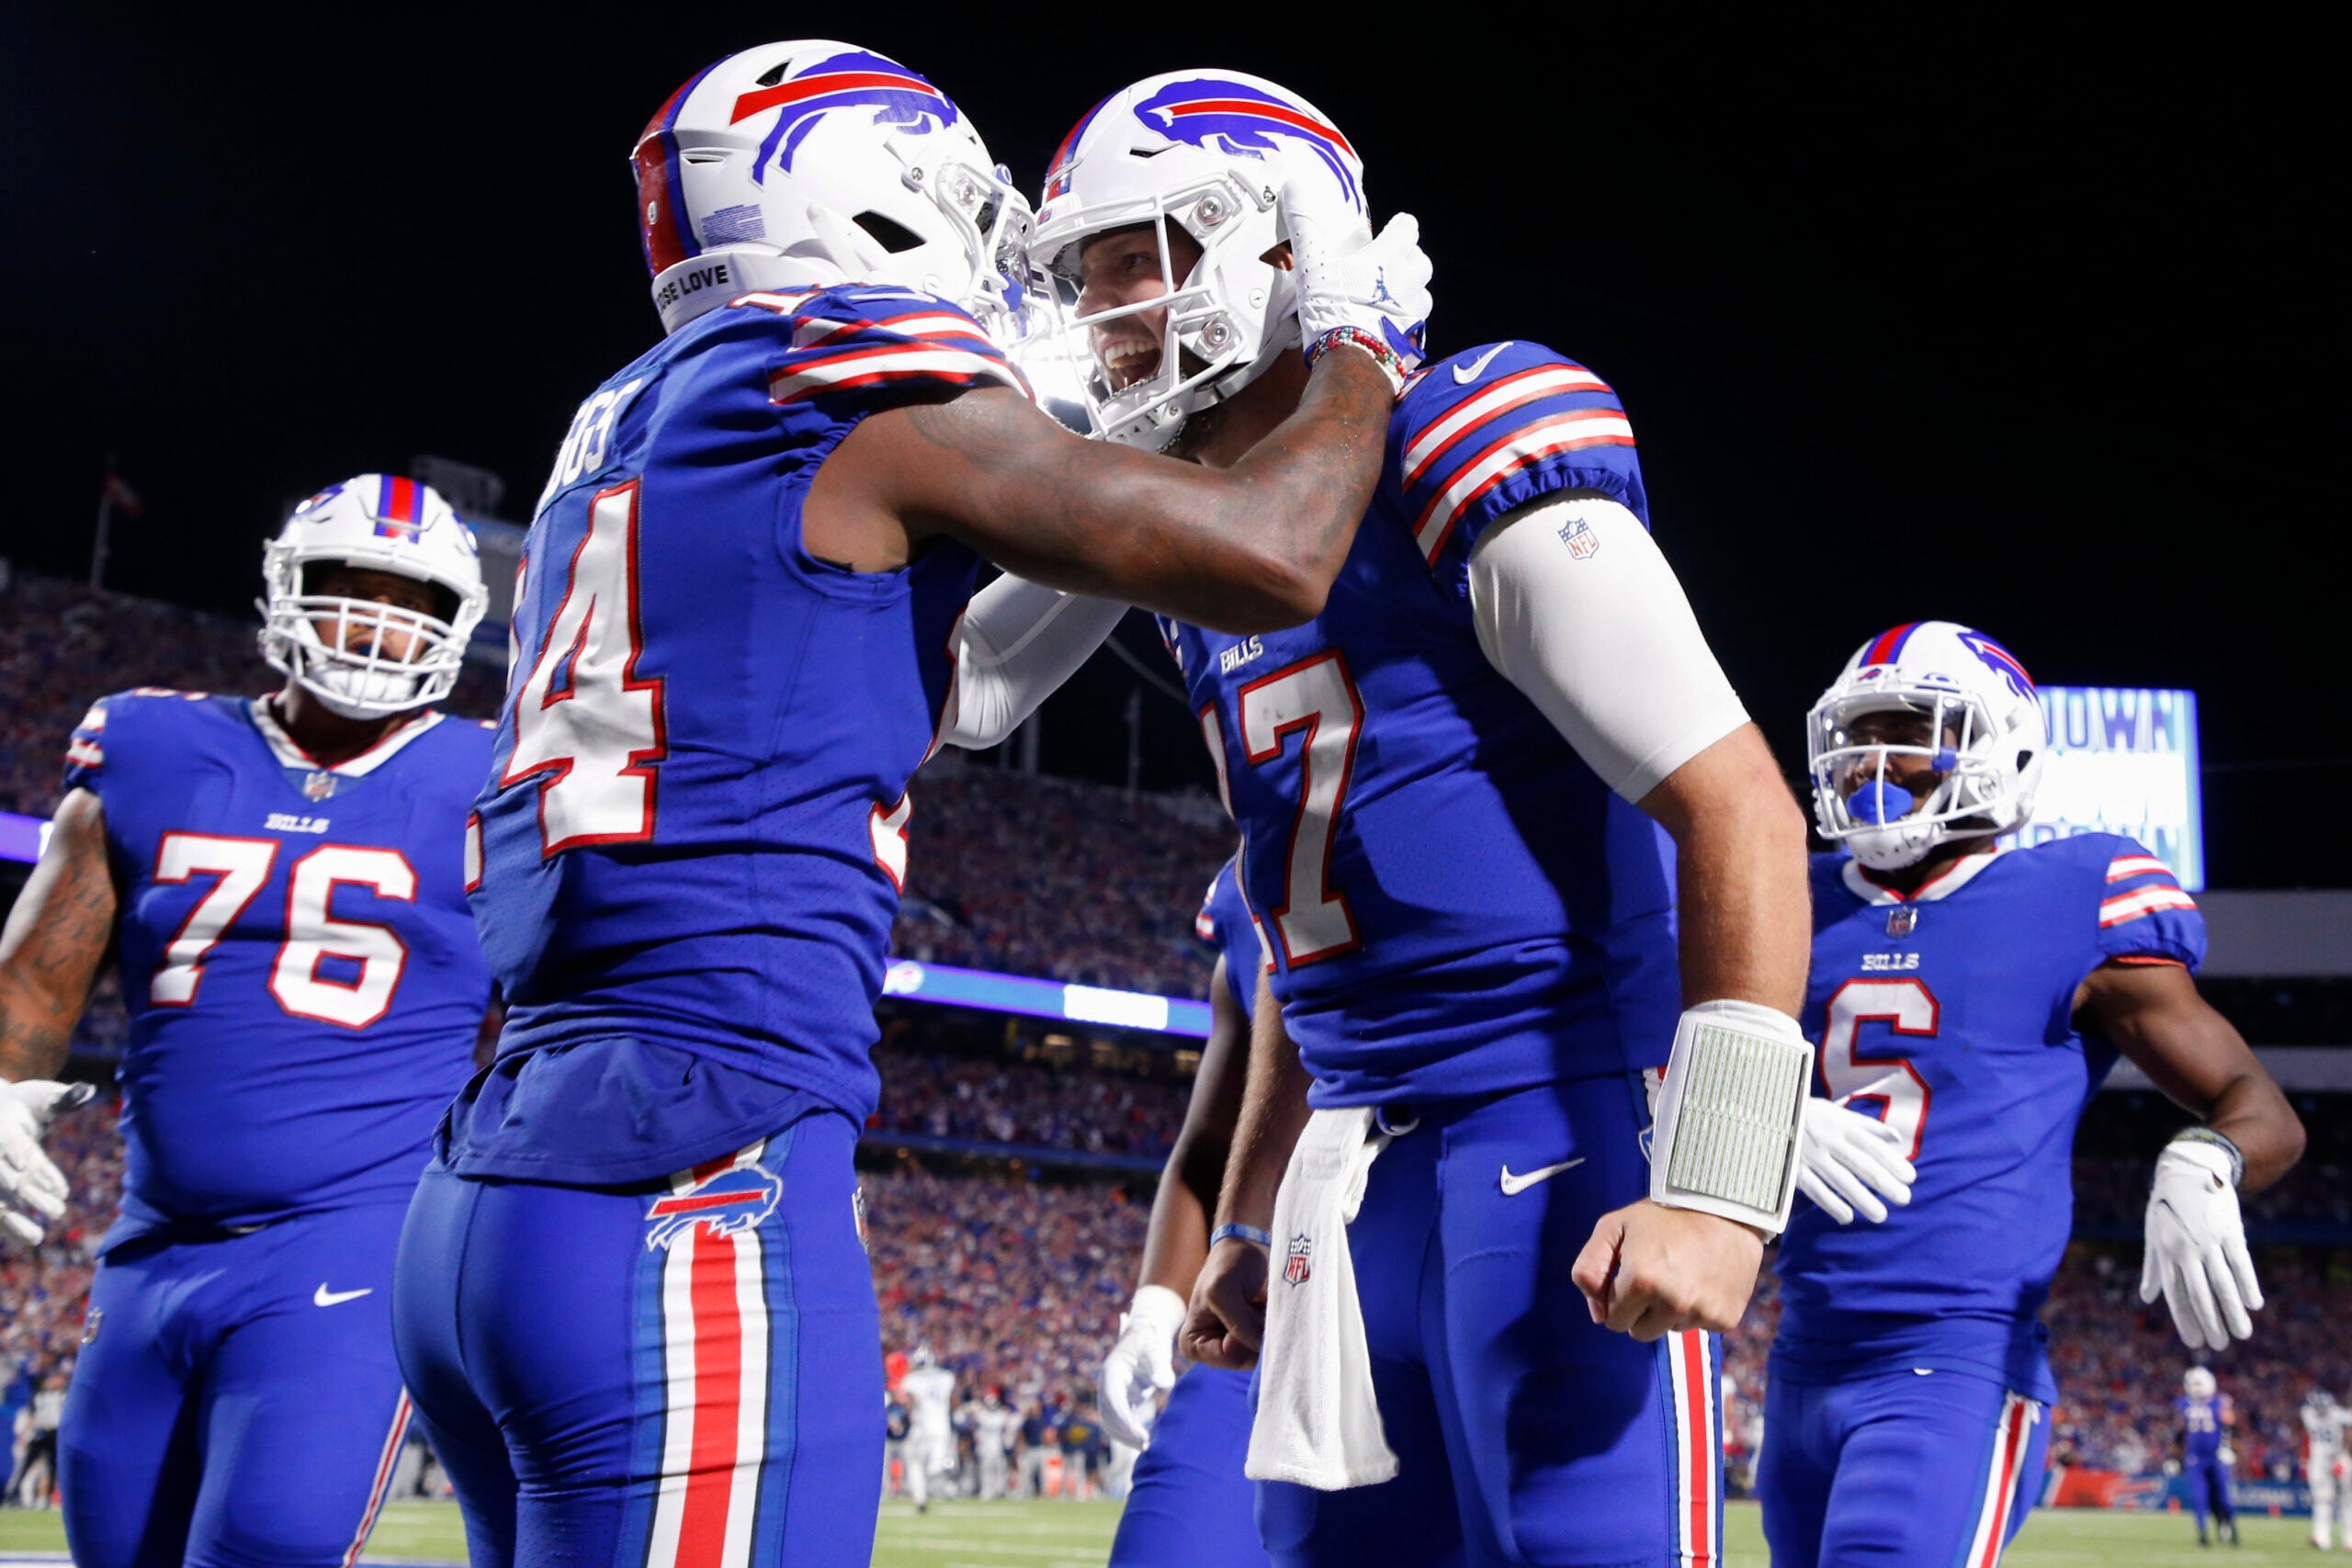 Buffalo Bills' Stefon Diggs, second from left, celebrates with quarterback Josh Allen, second from right, after they connected for a touchdown during the second half of an NFL football game against the Tennessee Titans, Monday, Sept. 19, 2022, in Orchard Park, N.Y.